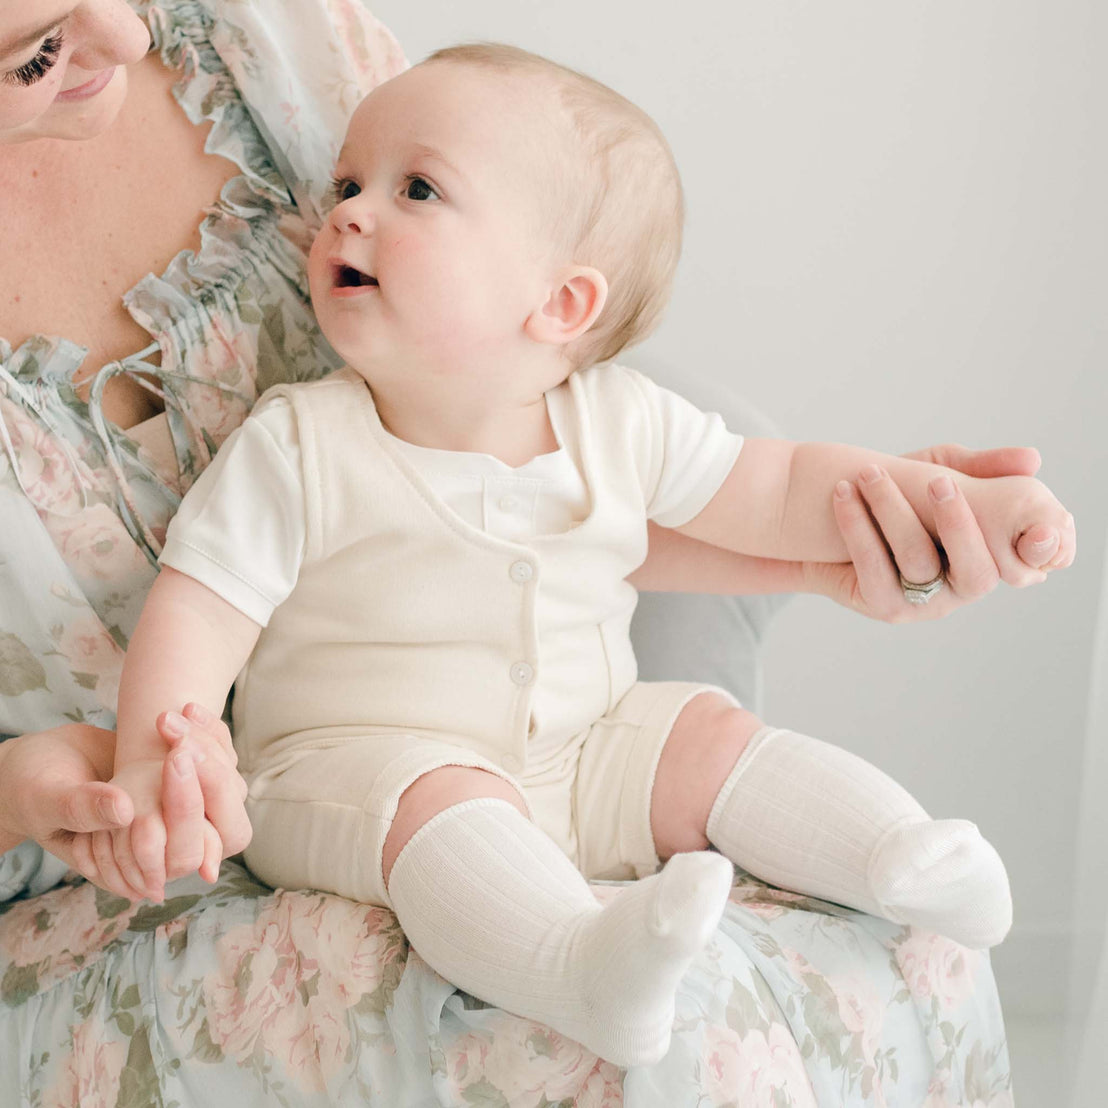 Baby boy sits on his mother's lap. He is wearing a tan vest, shorts and an ivory onesie